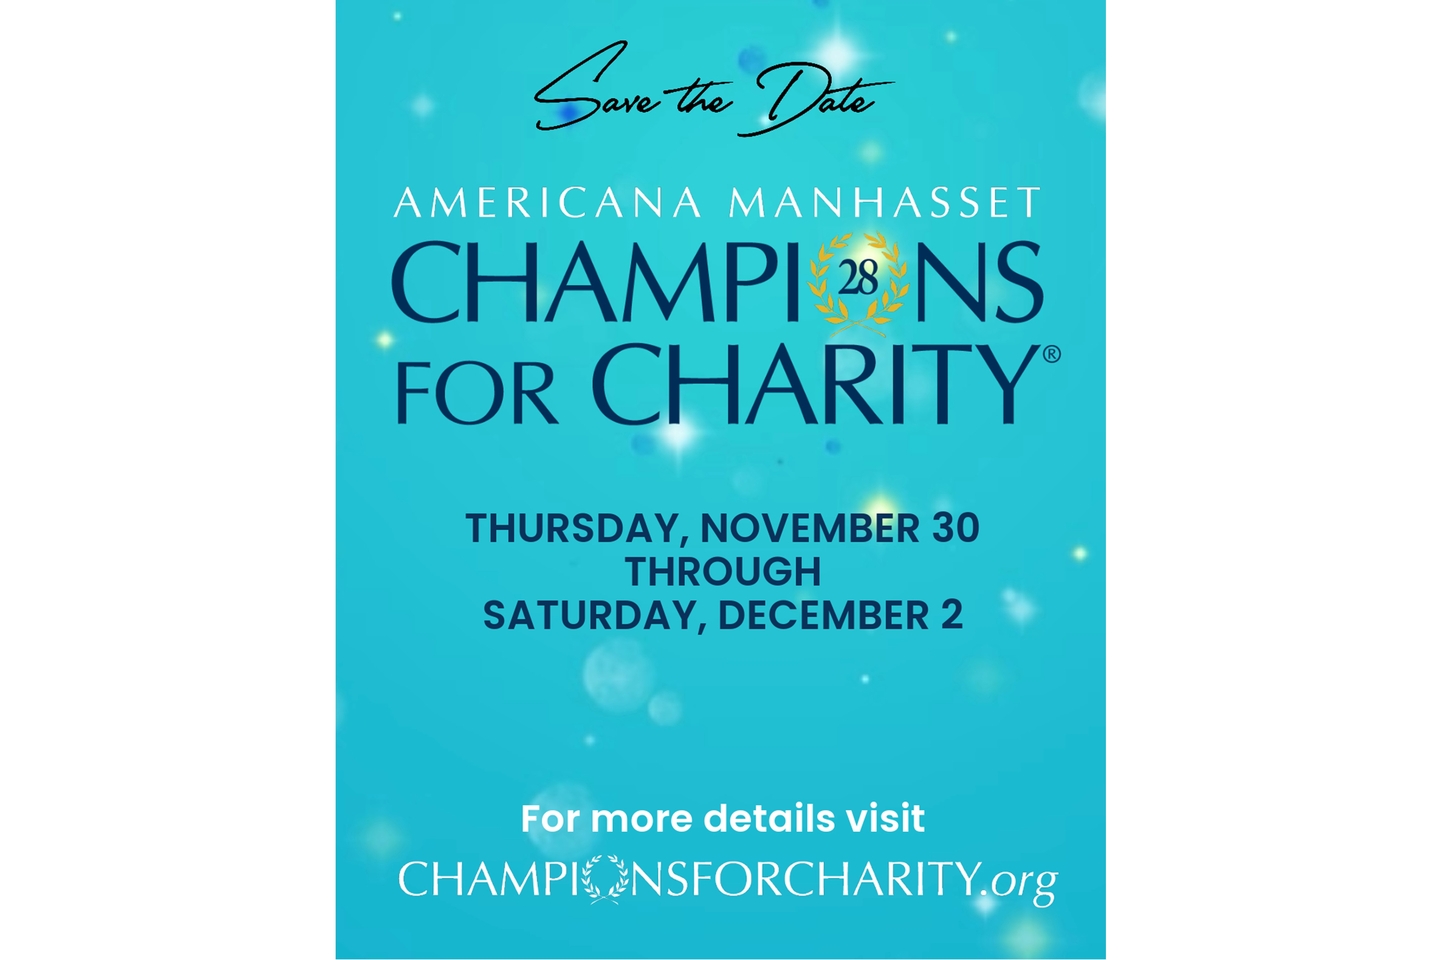 An image of a blue flyer with stars in the background. At the top reads Save the Date Americana Manhasset Champions for Charity with the number 28 in the O. Underneath are the details: Thursday, November 30 through Saturday, December 2. On the bottom reads: For details visit CHAMPIONSFORCHARITY.ORG.